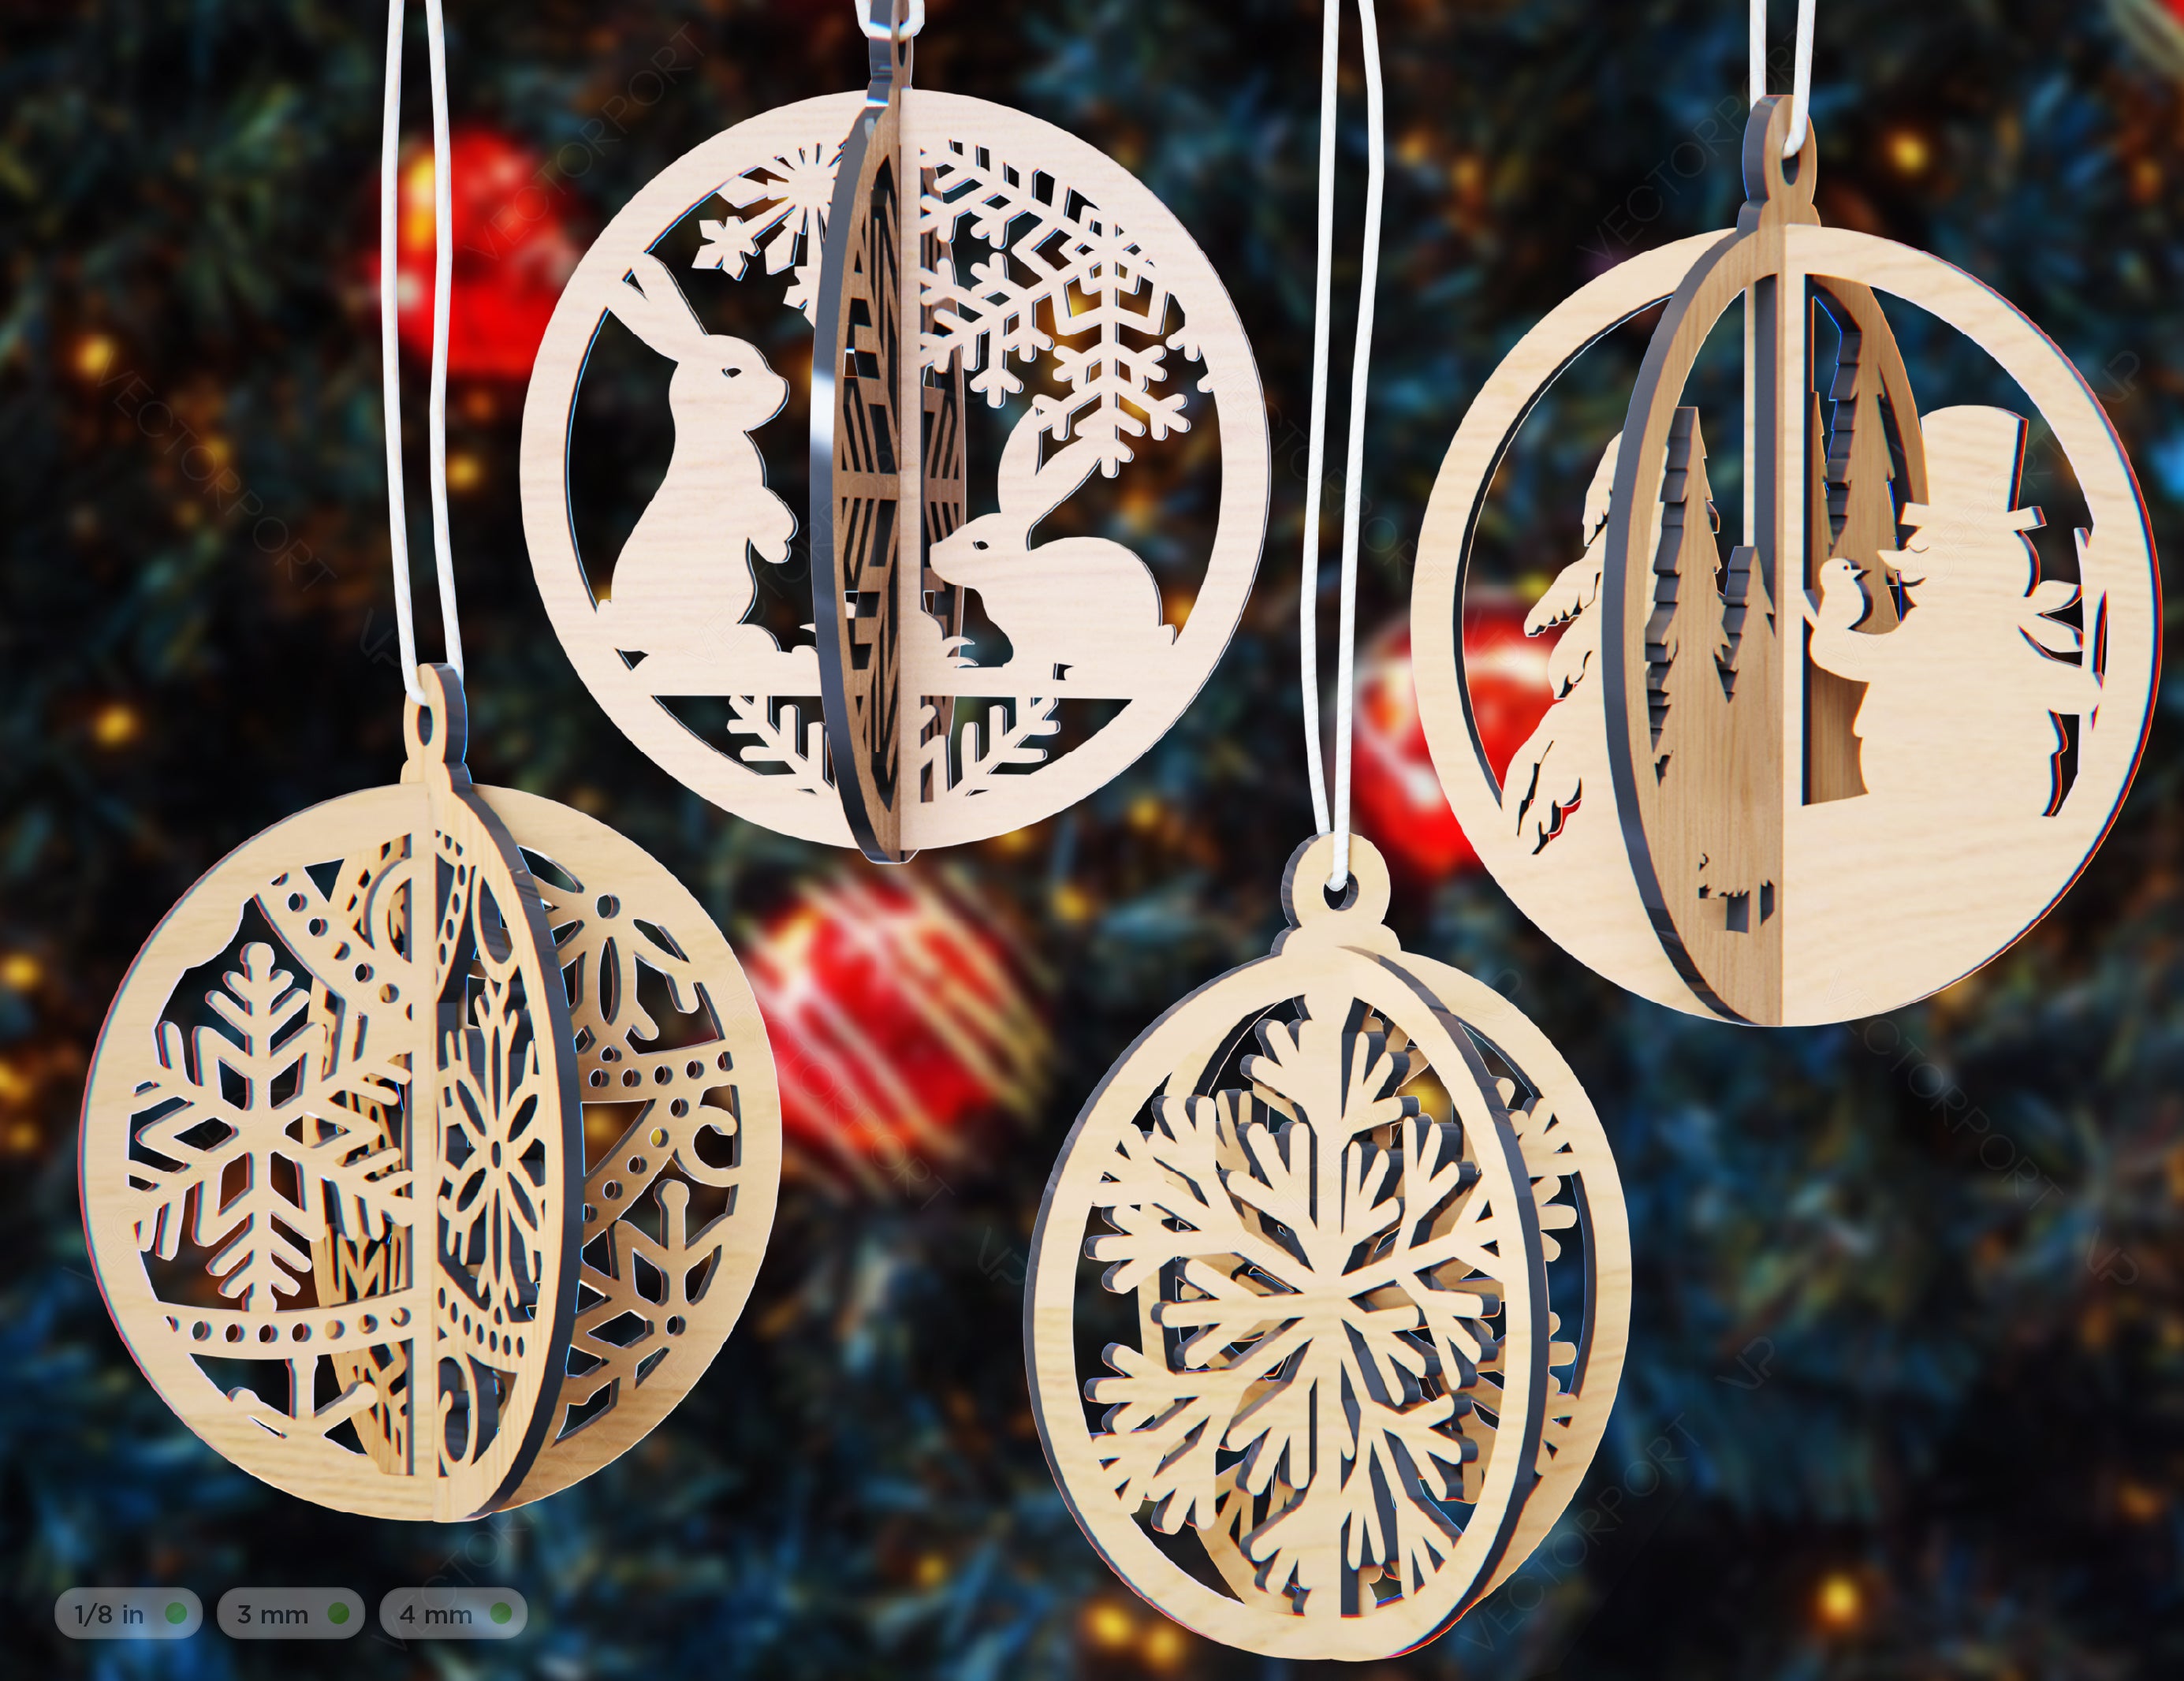 New Year 2023 Tree Bauble Wood 3D Laser Cut Christmas Ball Ornament Ro ...